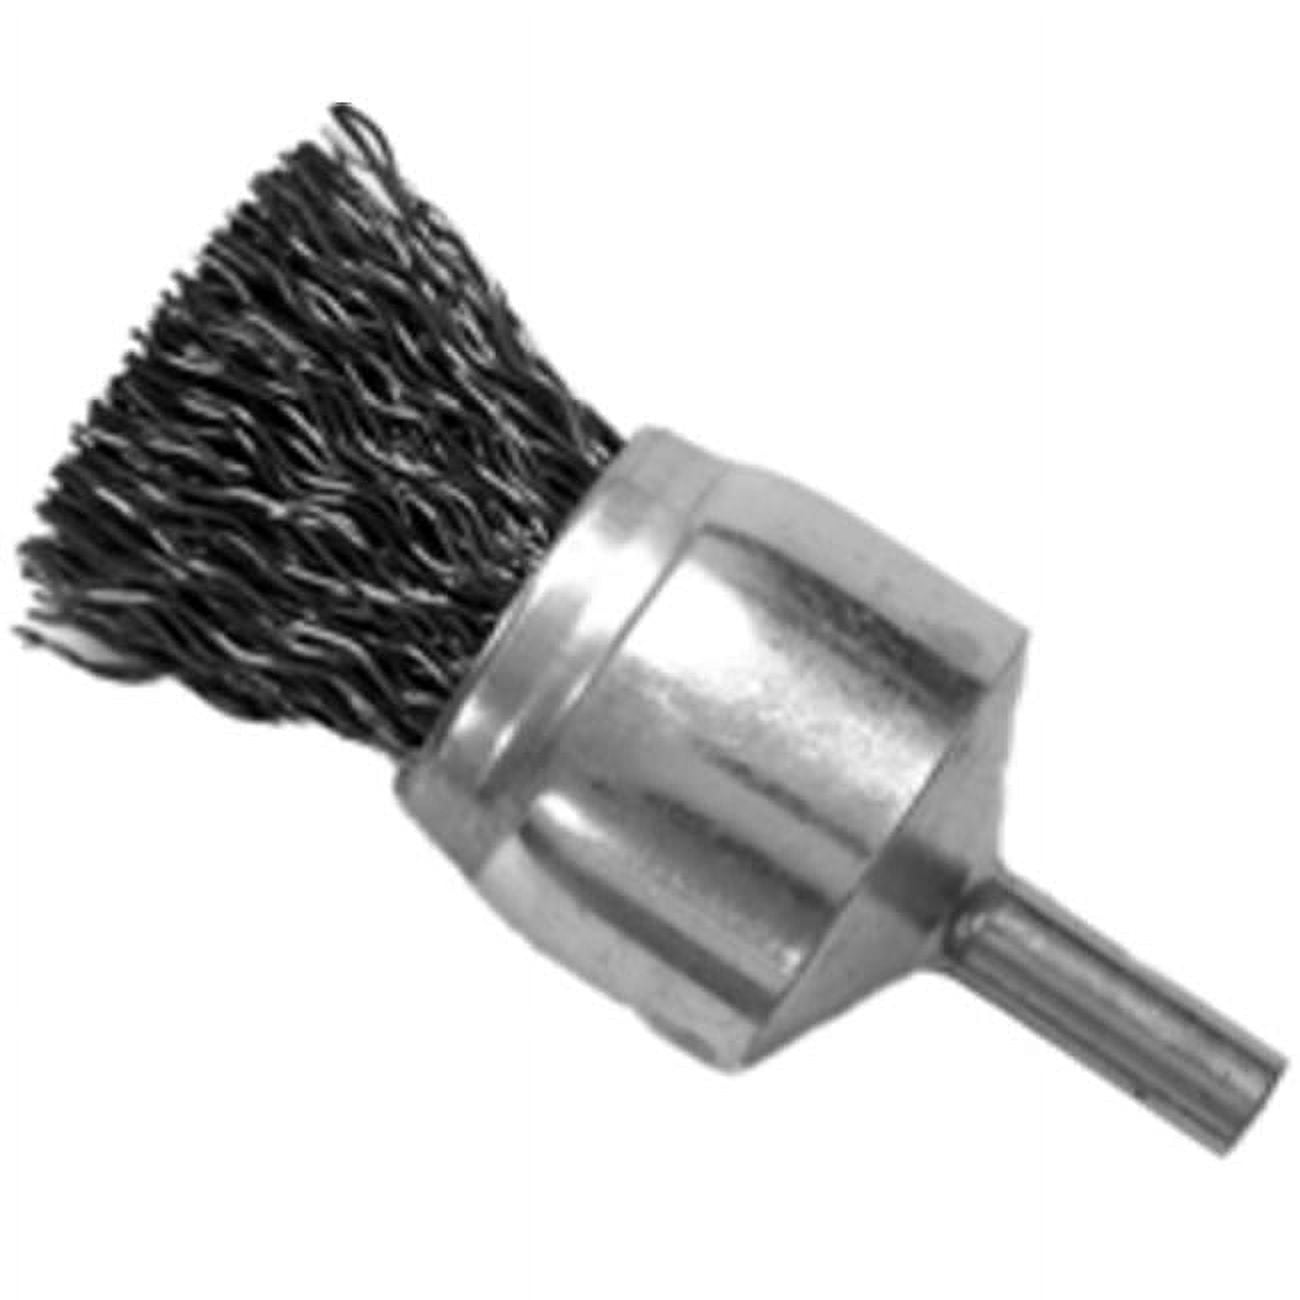 22019 0.75 In. Coarse Mounted End Cup Brush